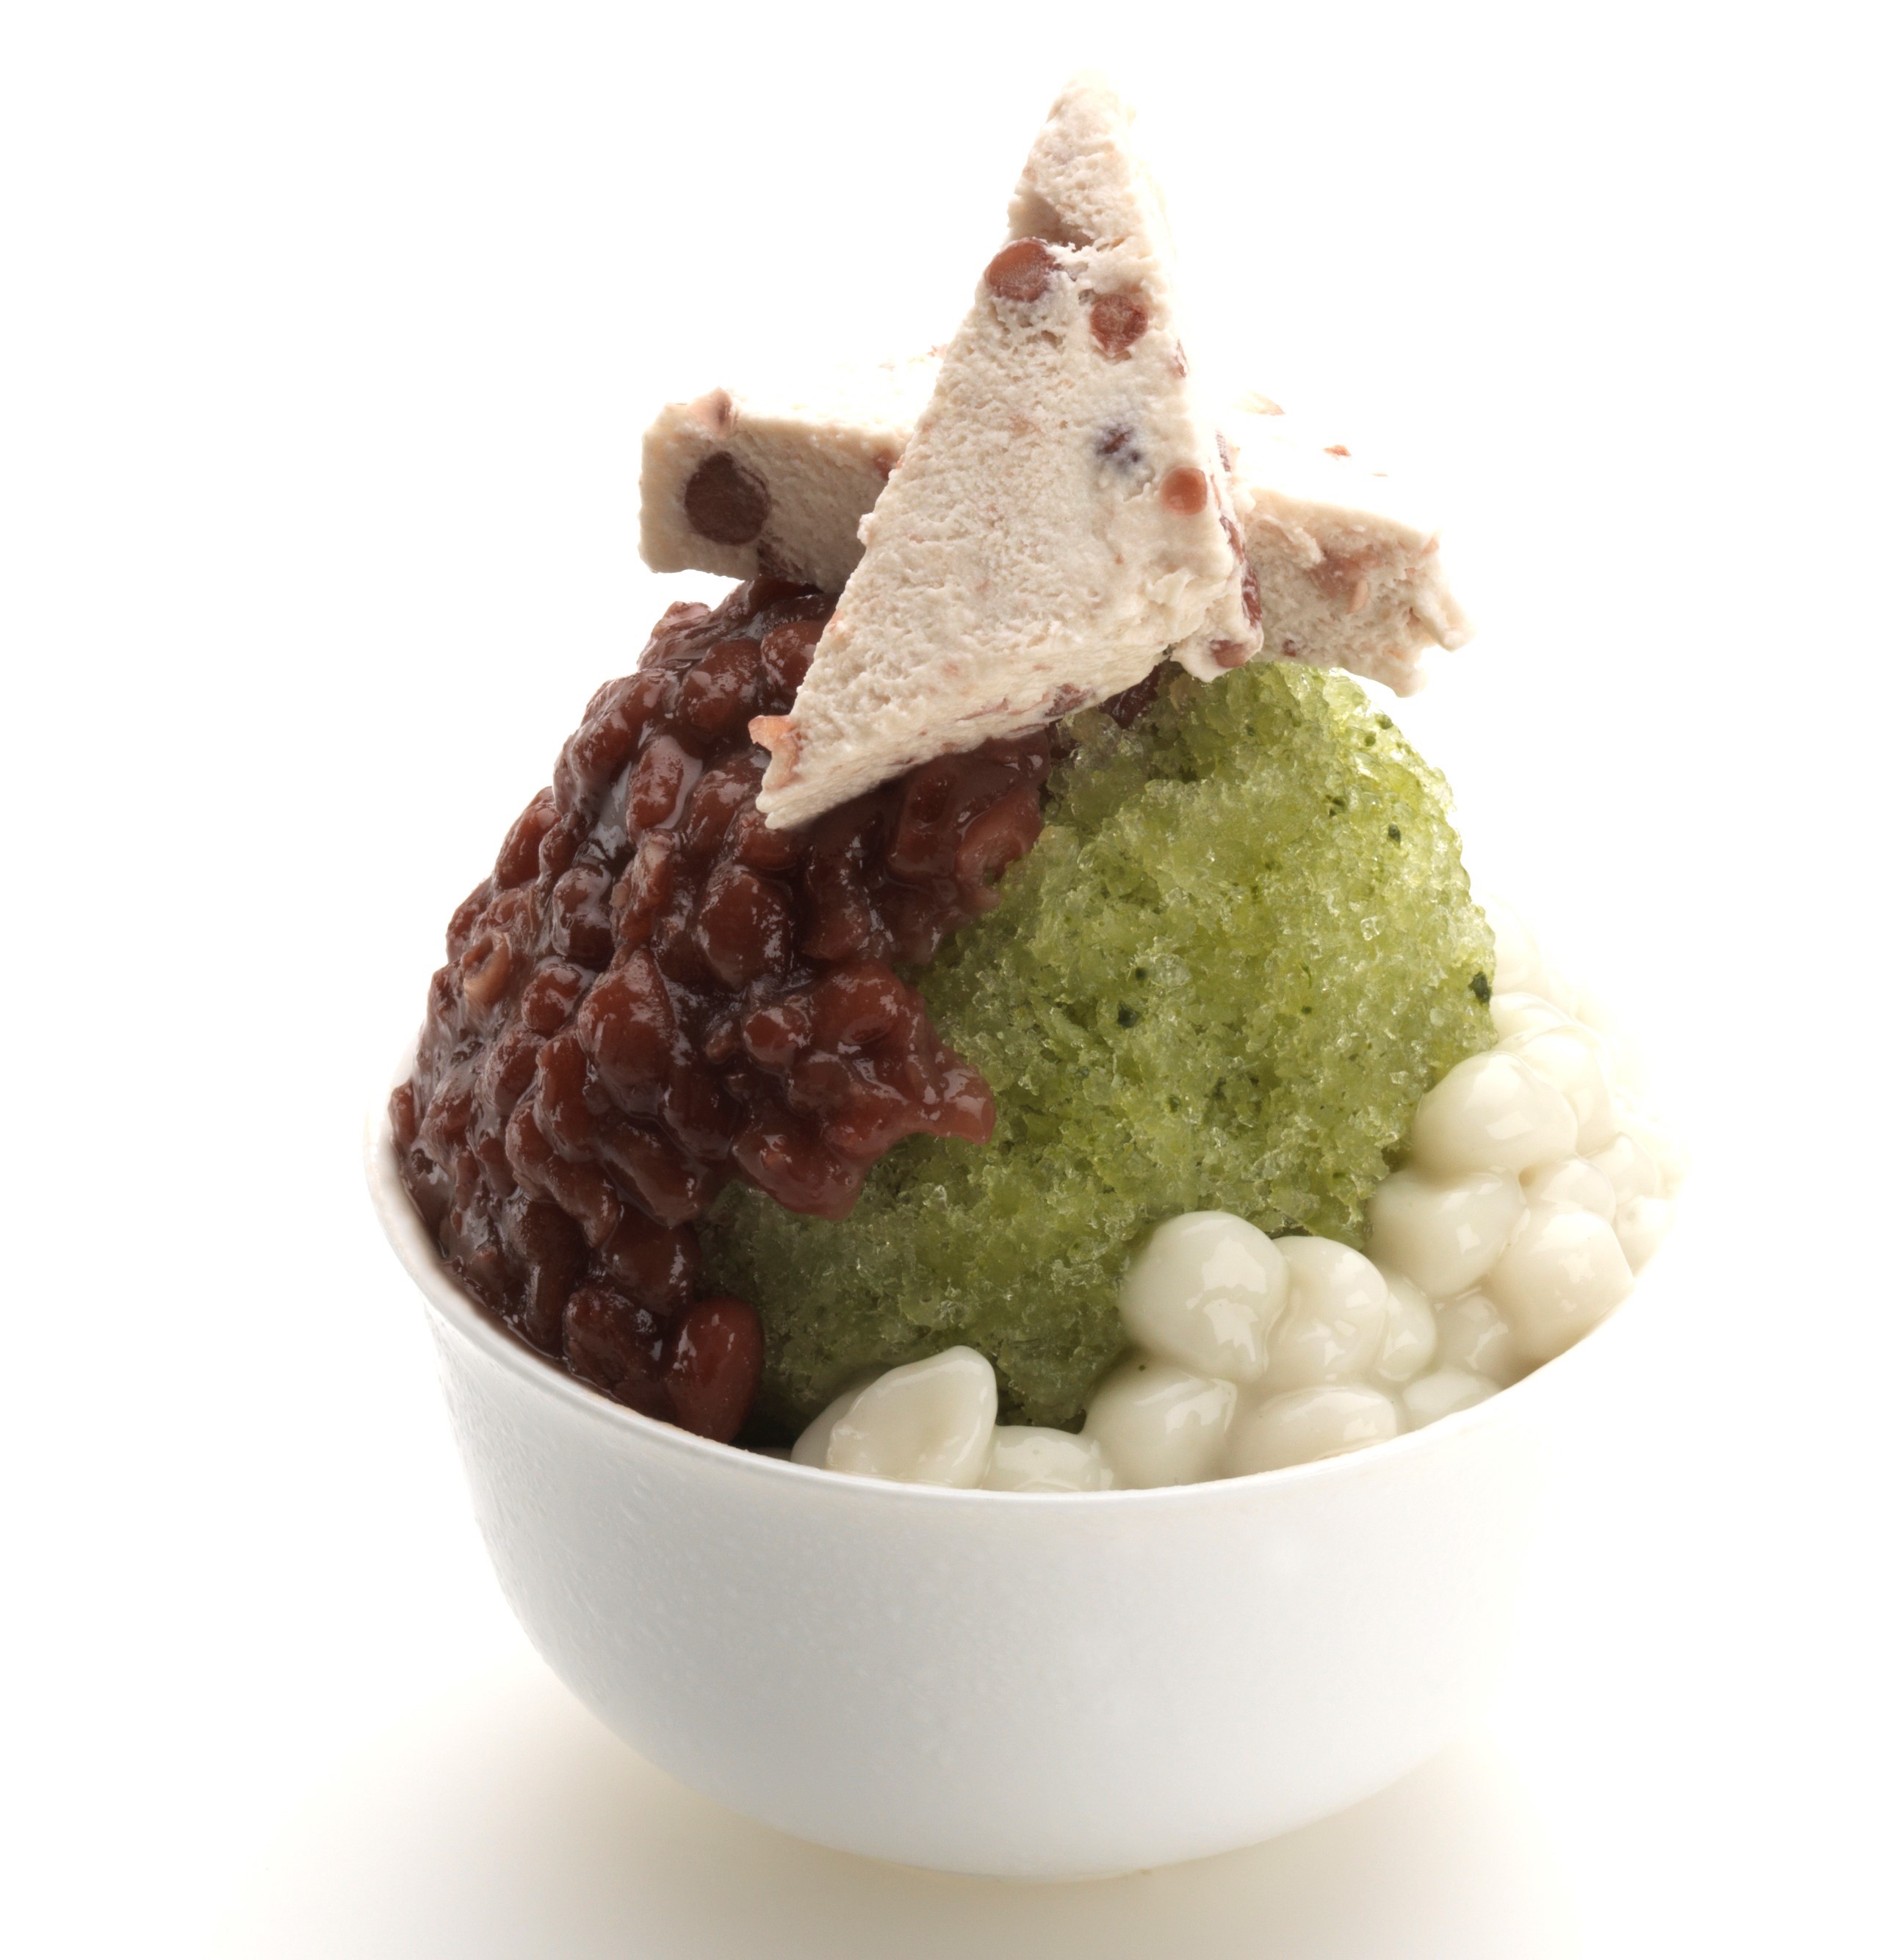 Dessert Kitchen's shaved ice with mochi and red bean.